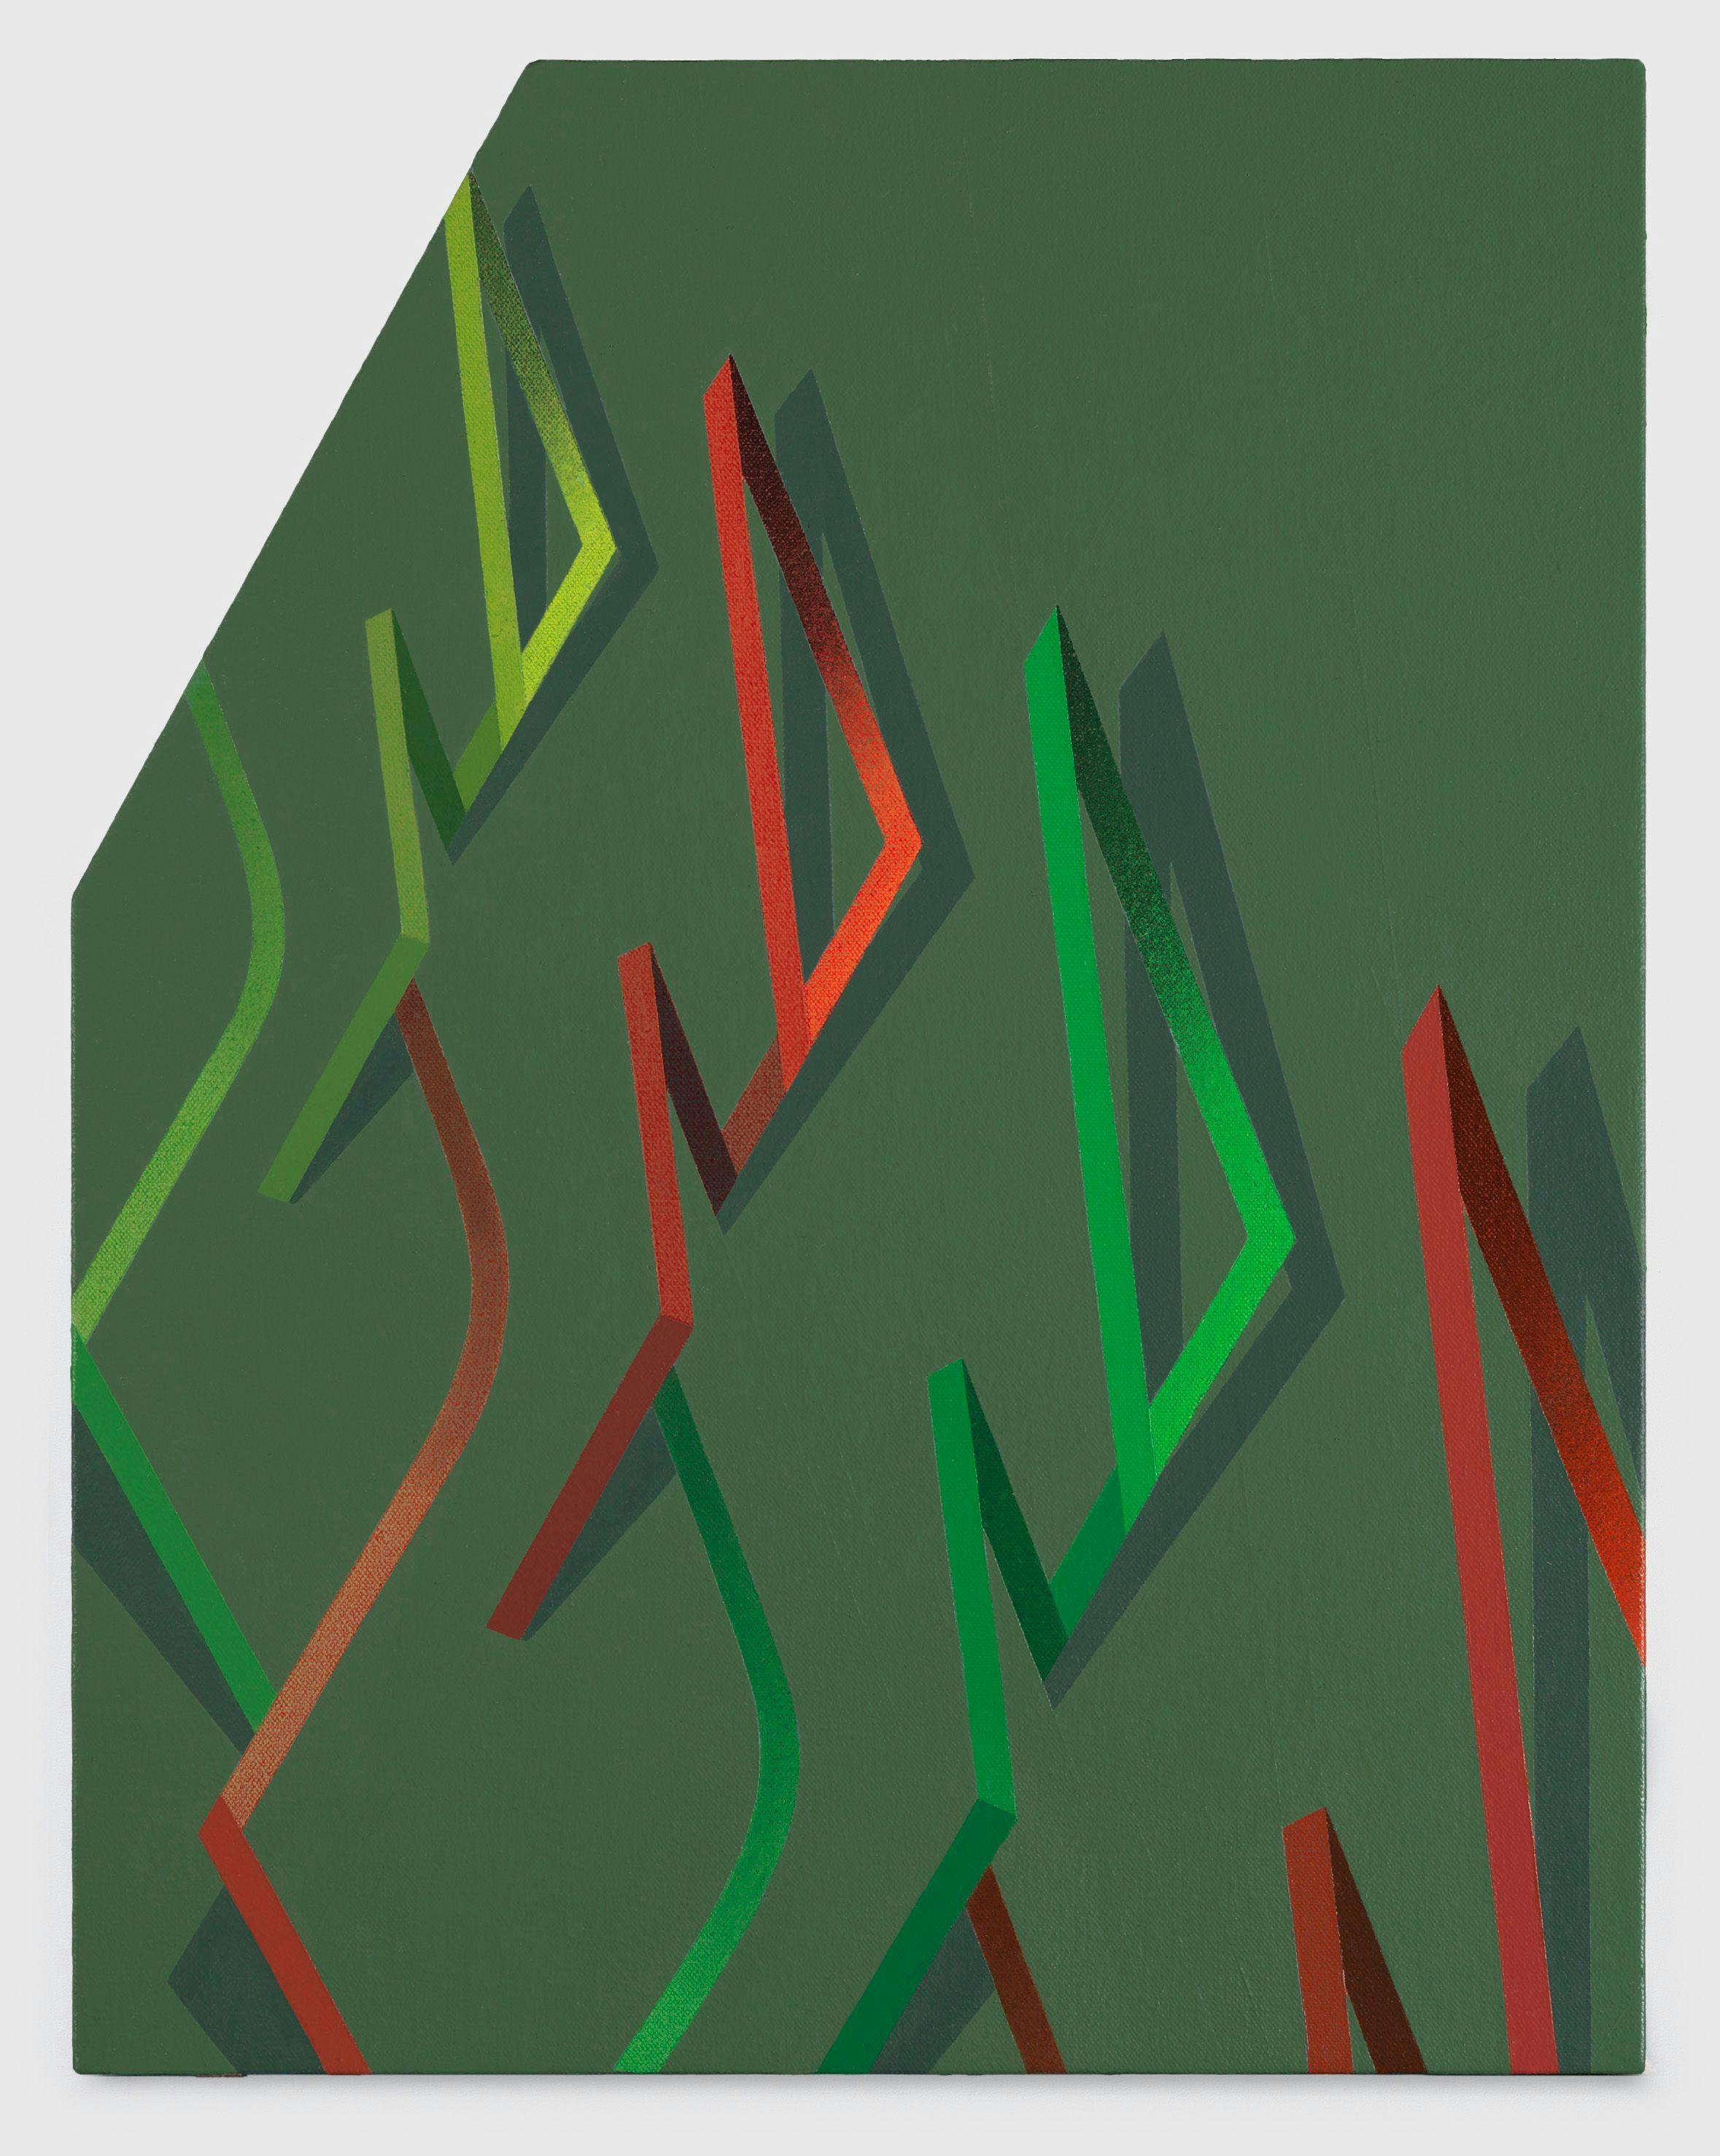 A painting by Tomma Abts, titled Stino, dated 2019.